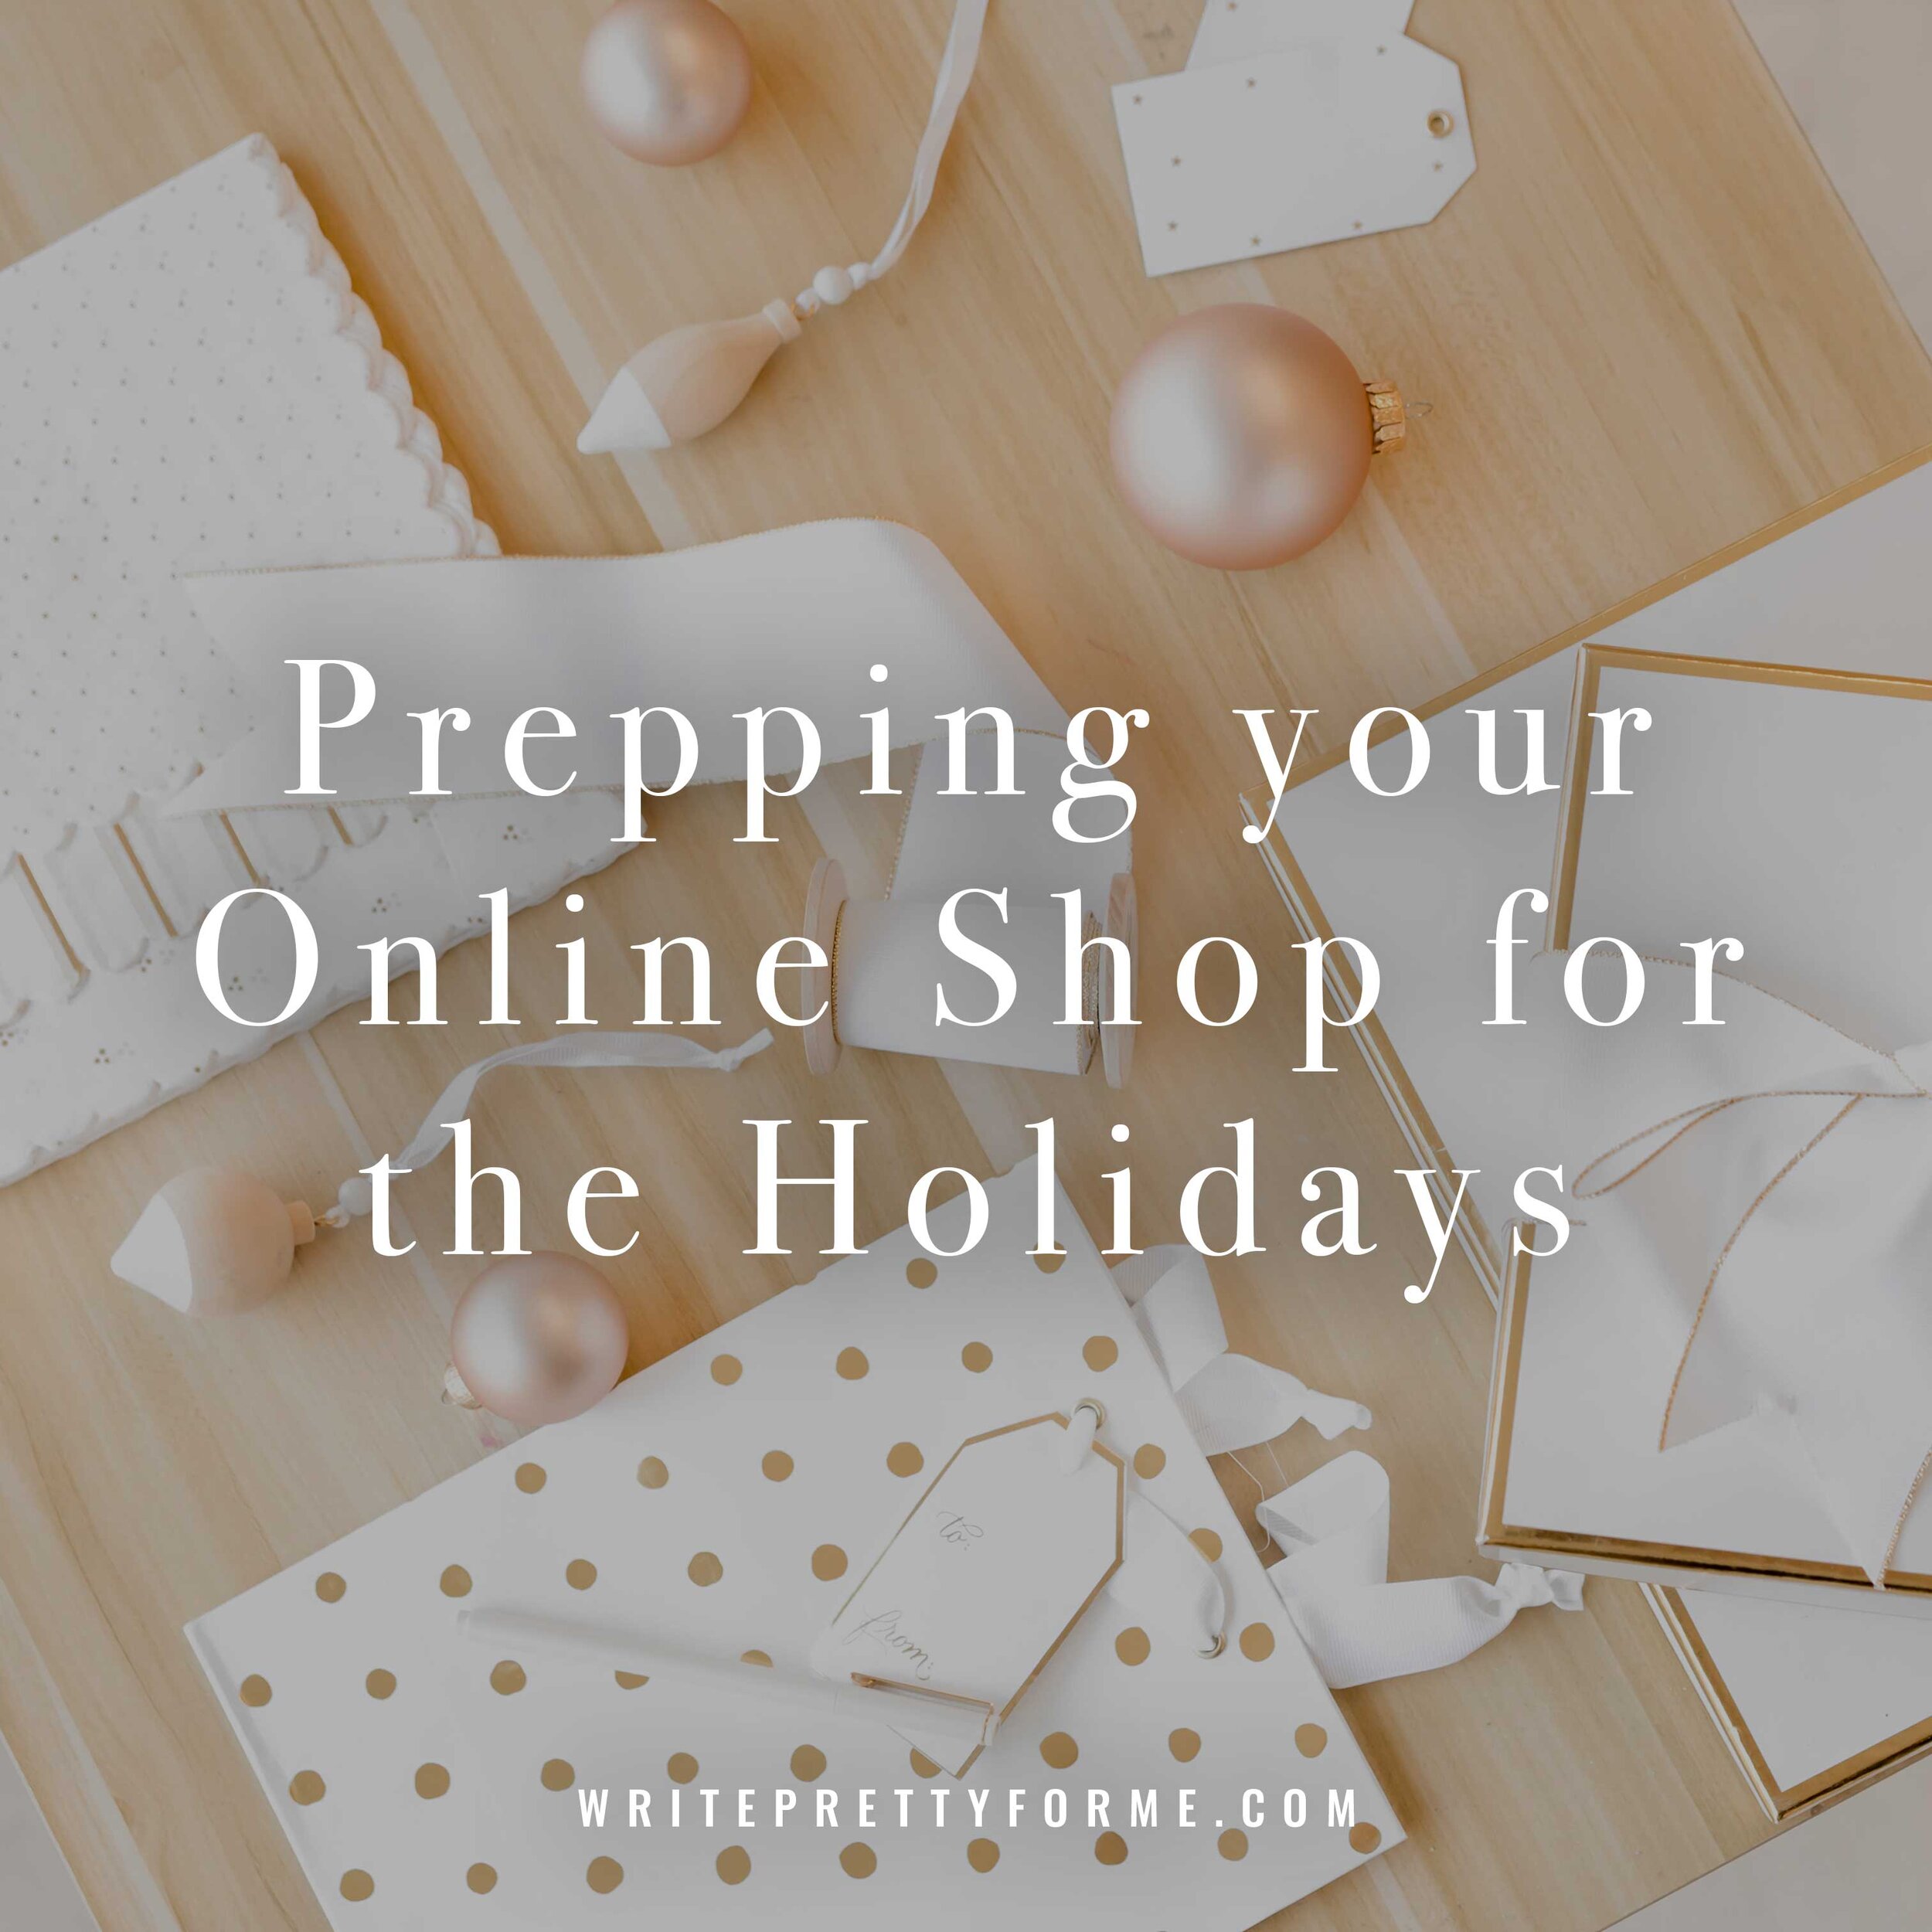 Prepping-your-online-Shop-for-the-Holidays---Creative-Business-Tips---Business-Resources.jpg